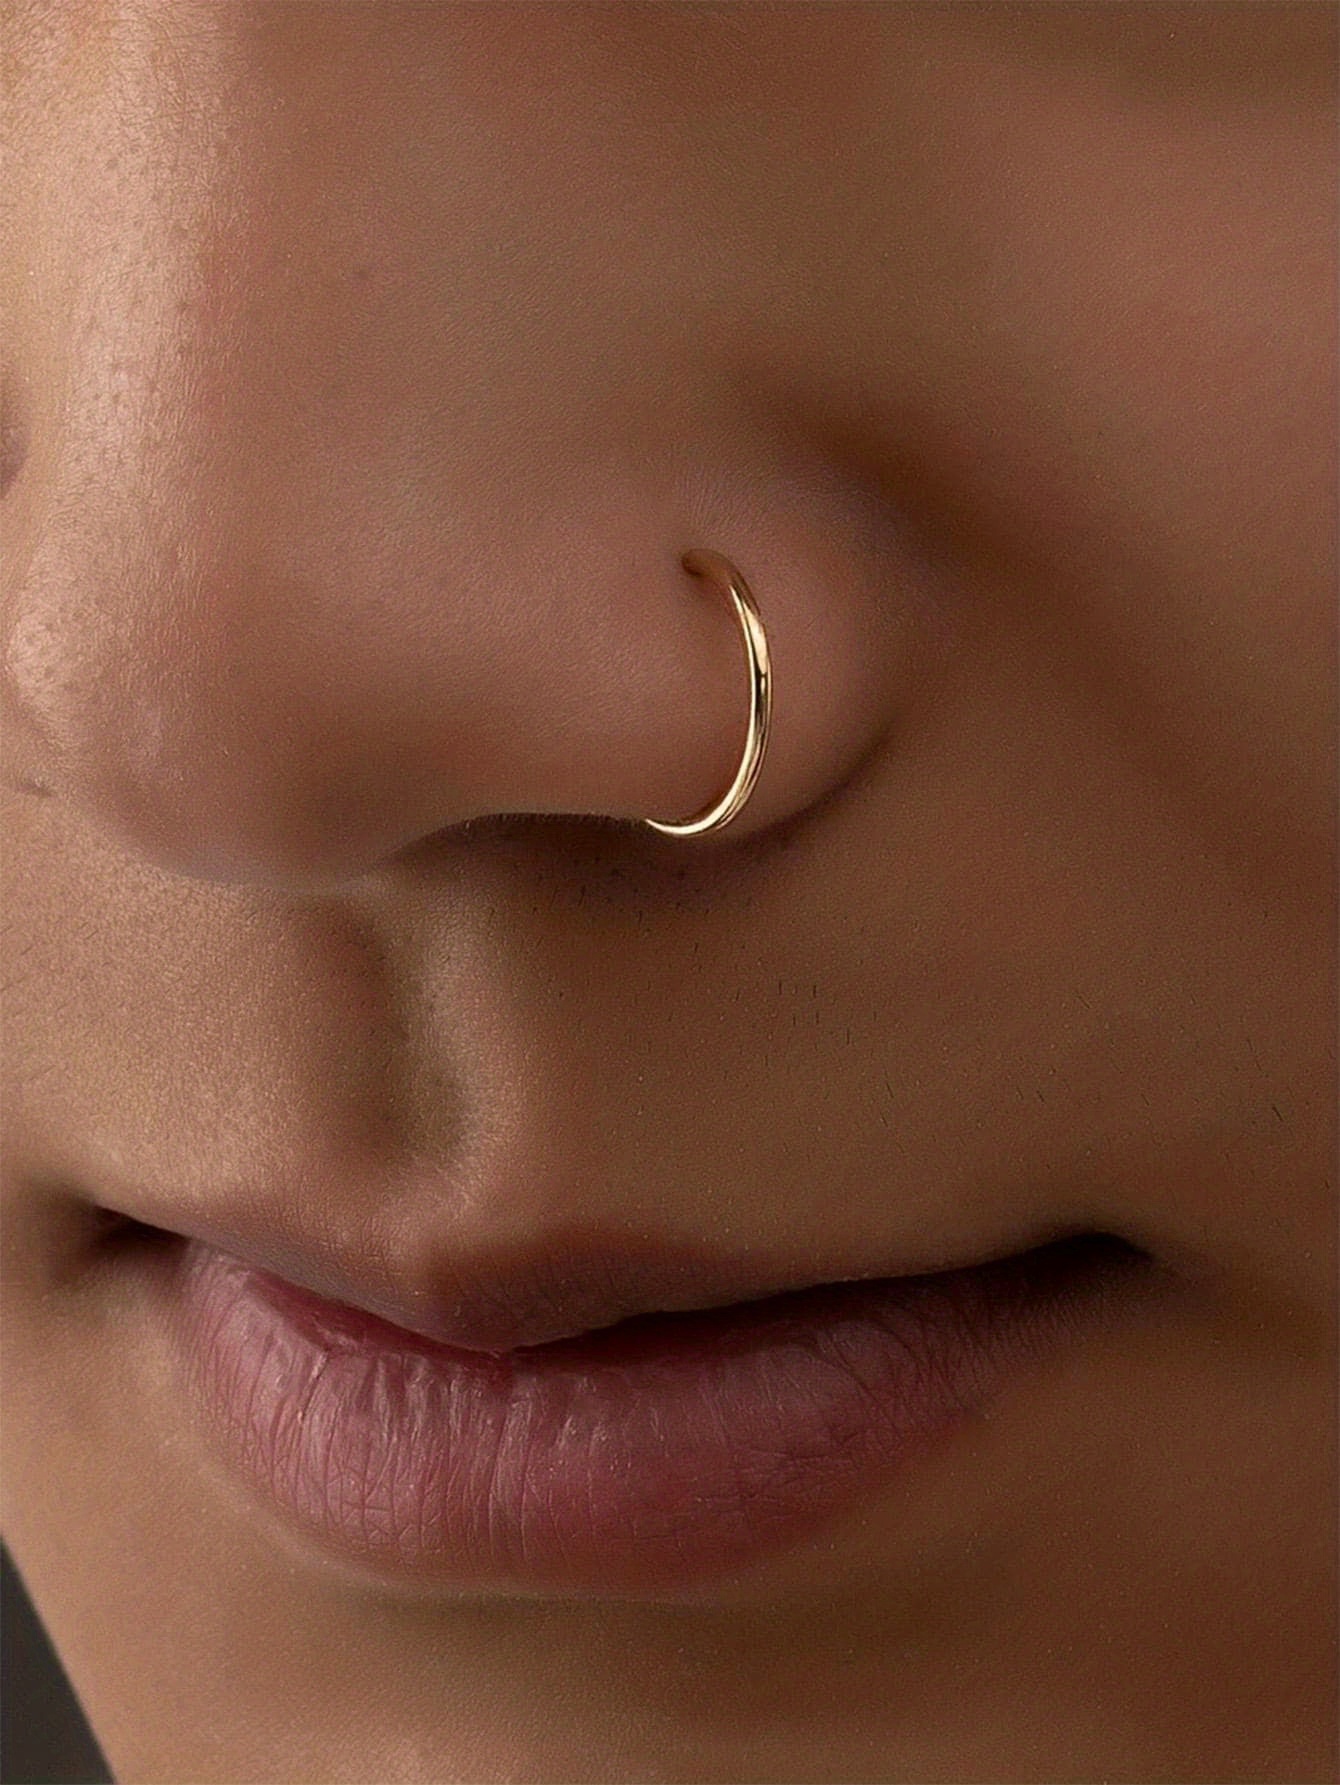 Forbidden Body Jewelry 14k Gold Nose Ring, 22g, Solid 7mm Micro Stud,  1.25-2mm CZ Simulated Diamond, Non-Irritating Skin Safe Real Gold, Women  and Men, Metal : Amazon.ca: Clothing, Shoes & Accessories